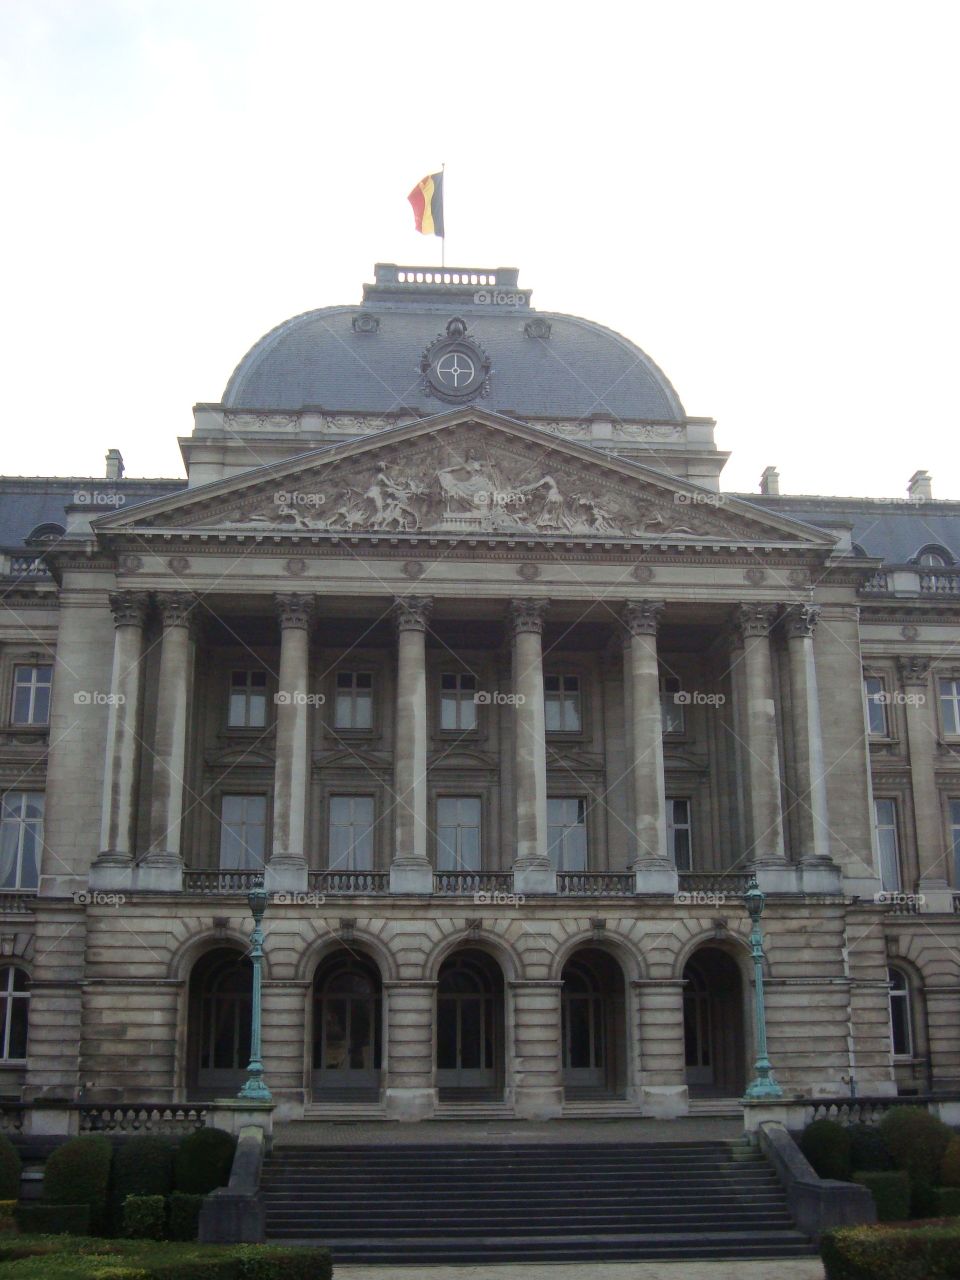 The Royal Palace. Brussels, Belgium. 